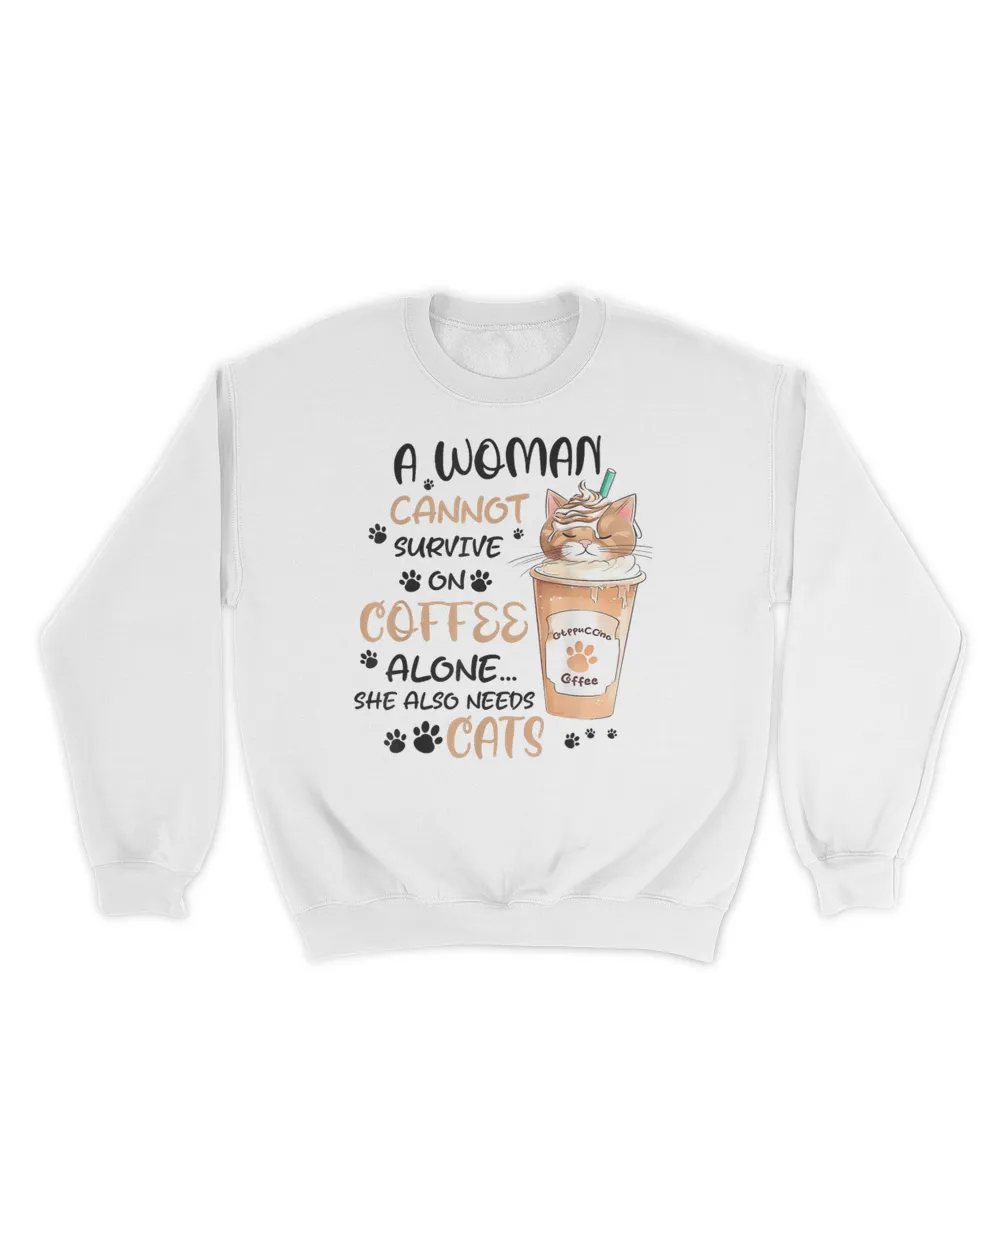 A Woman Cannot Survive On Coffee Alone She Also Needs Cats T-Shirt